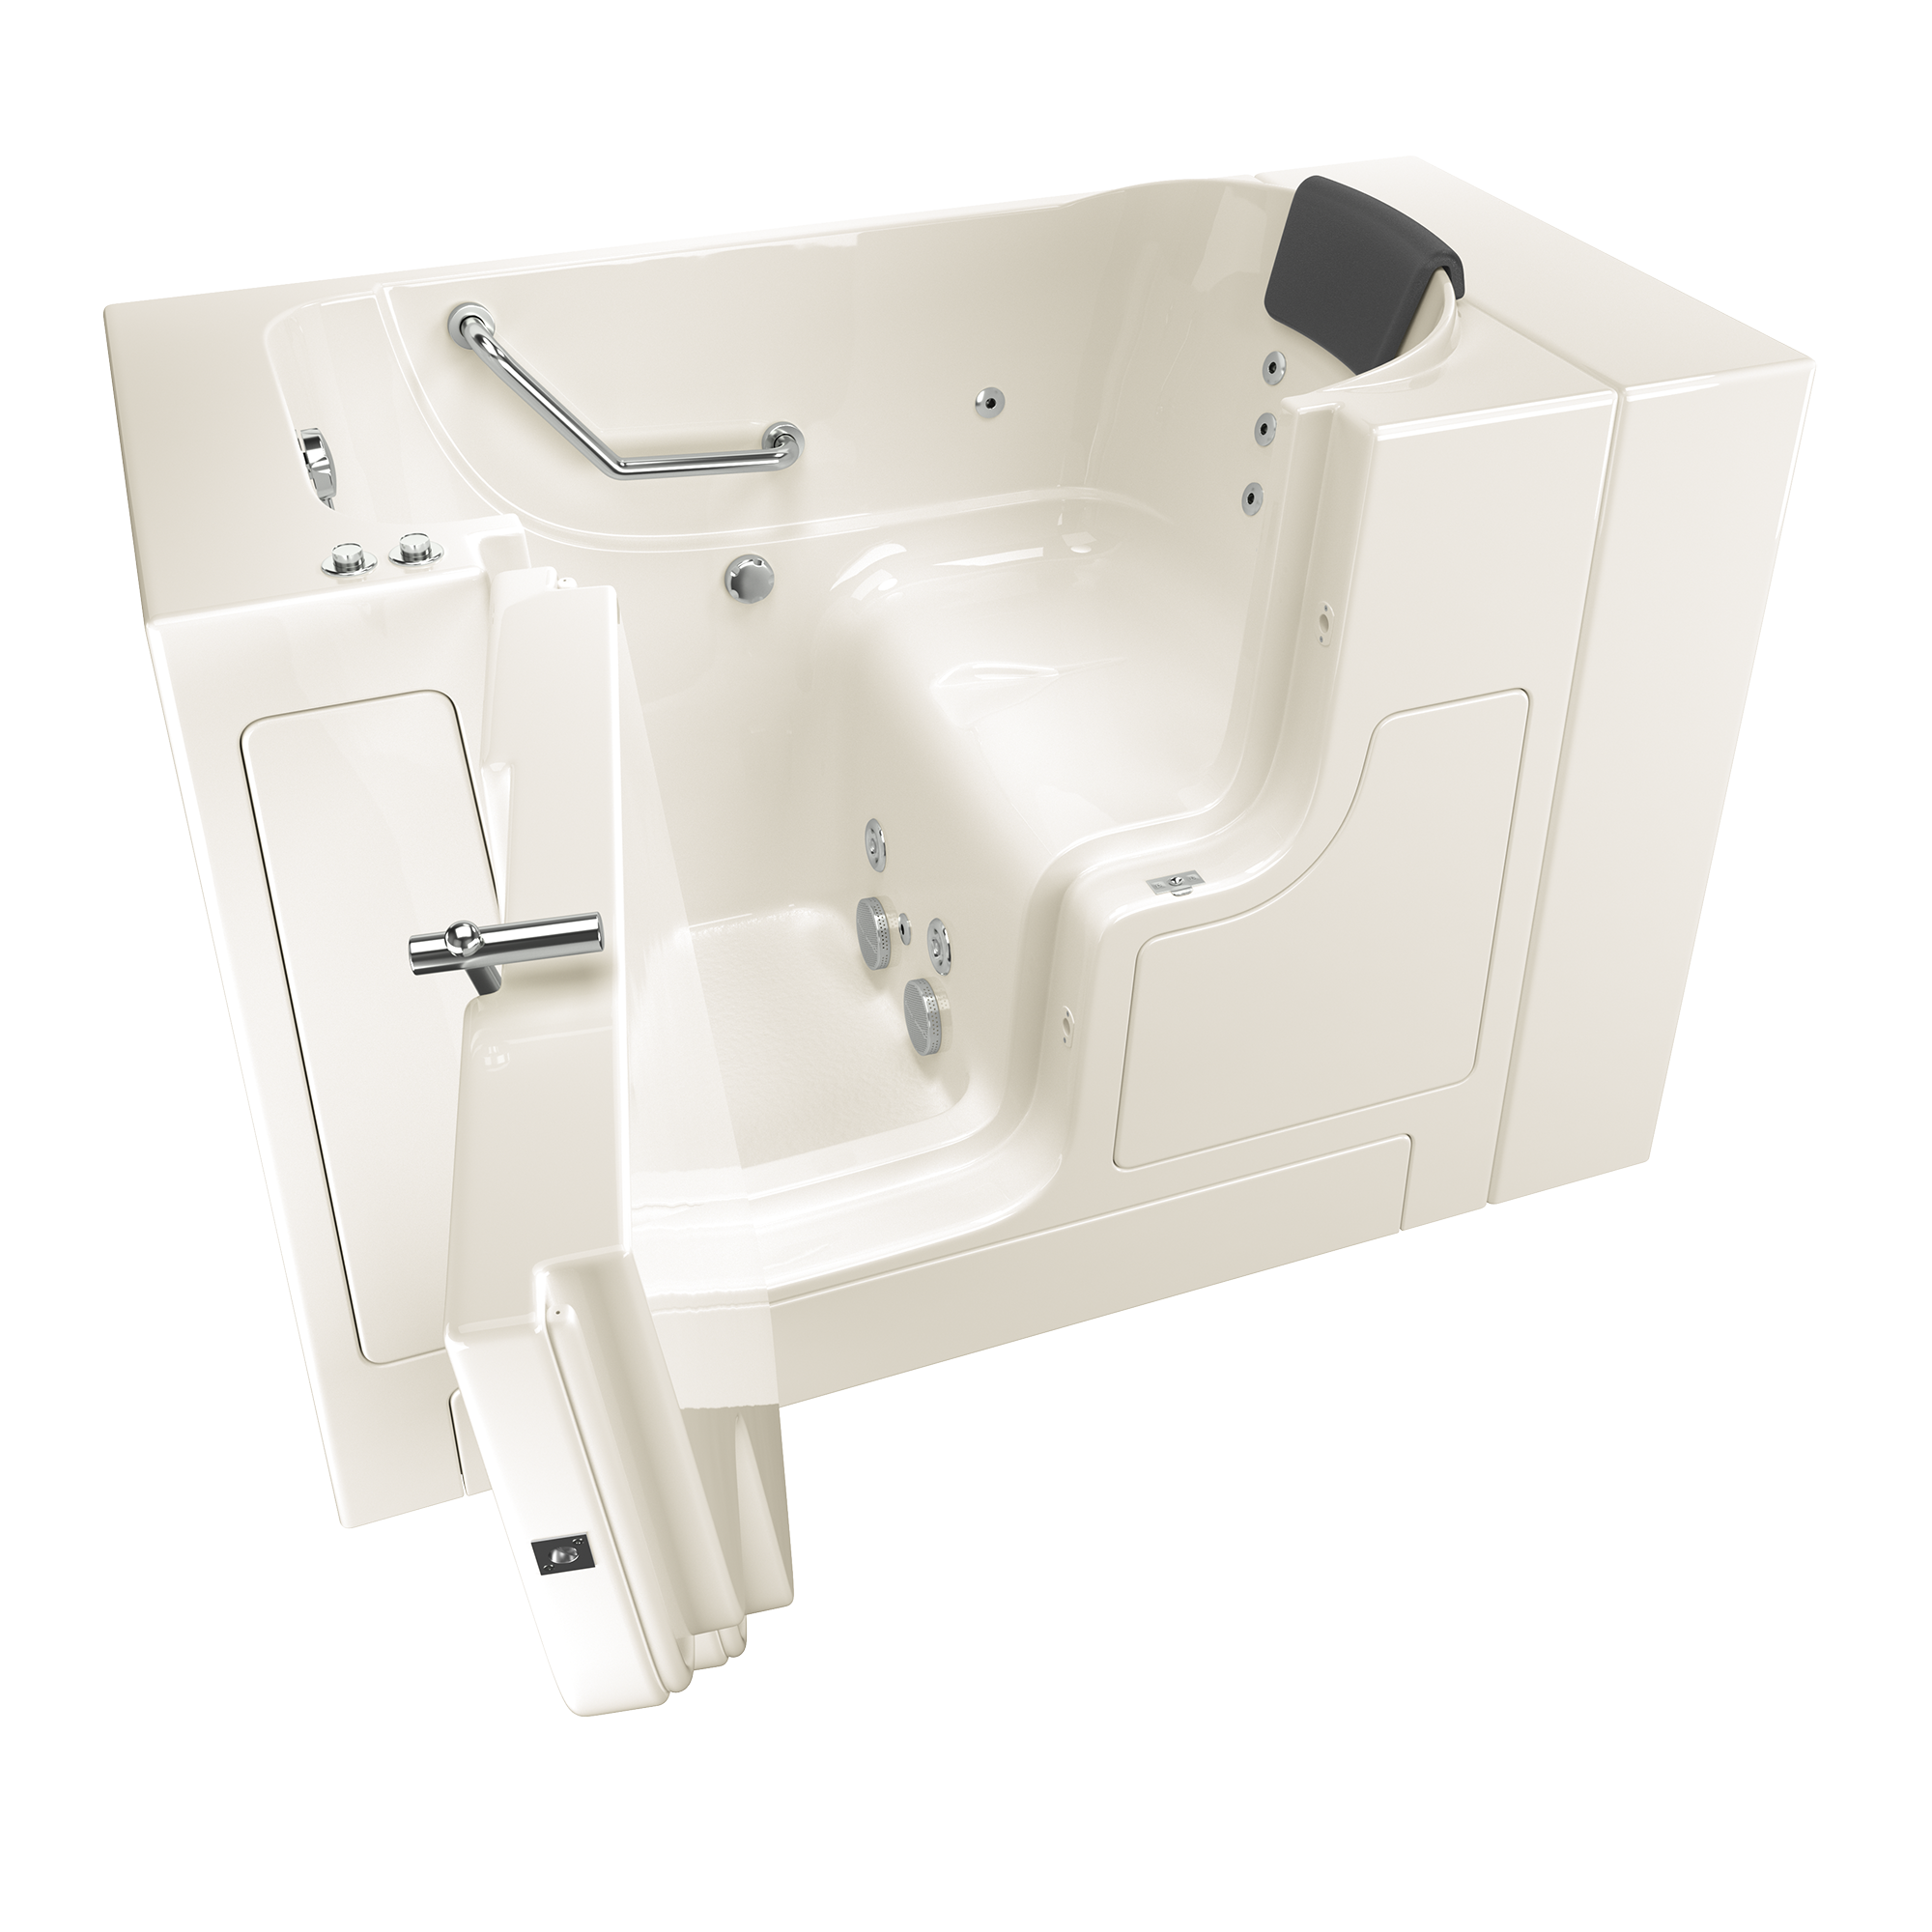 Gelcoat Premium Series 30 x 52 -Inch Walk-in Tub With Whirlpool System - Left-Hand Drain